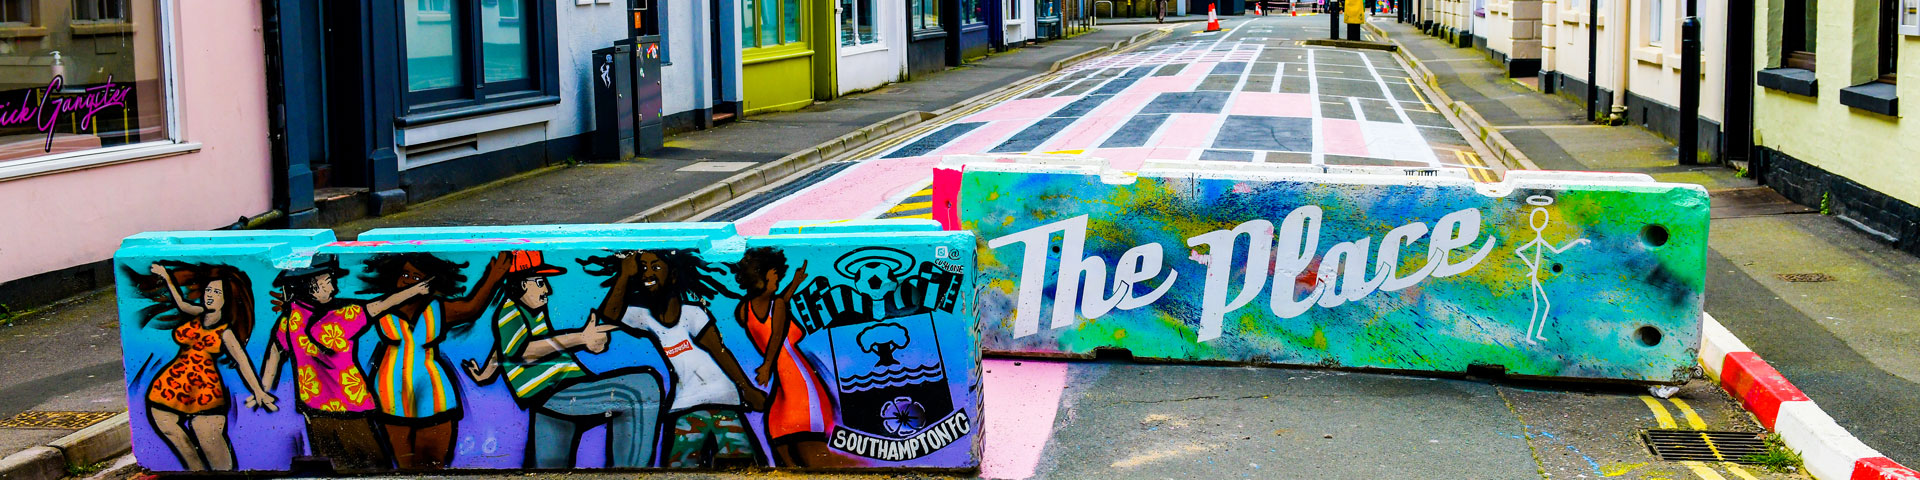 Some of the street art in Southampton's Bedford Place area